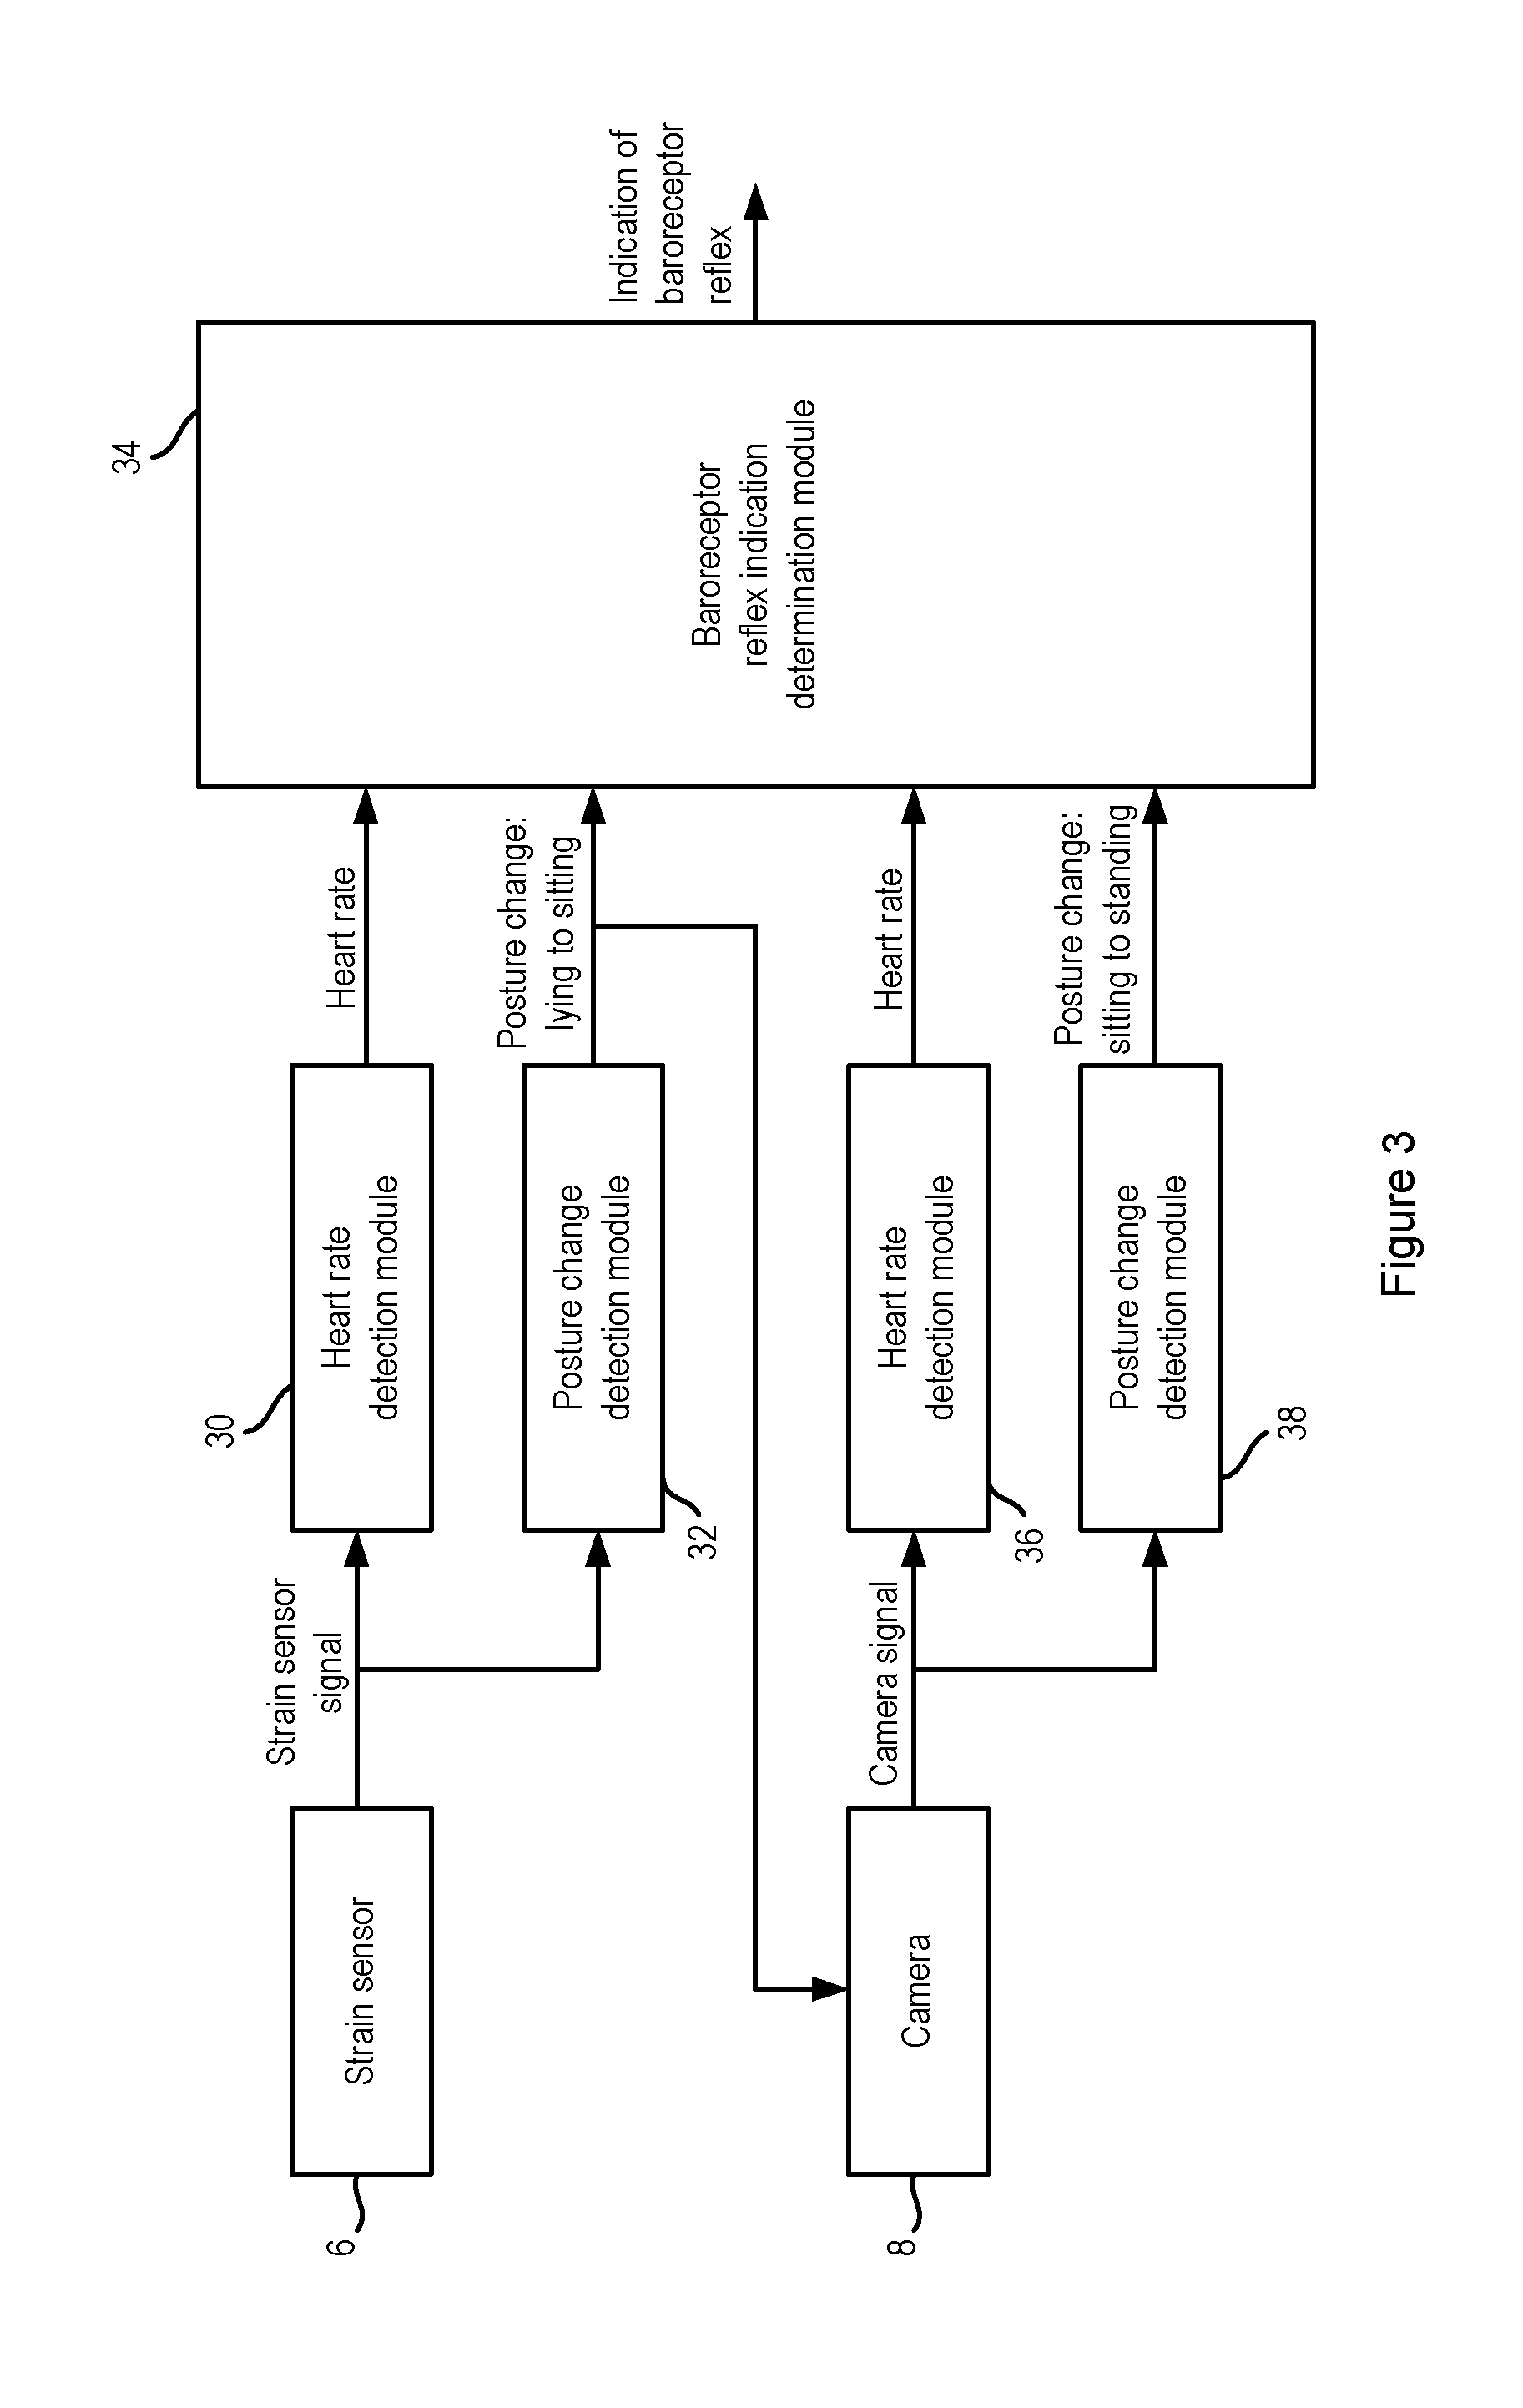 Method and apparatus for monitoring the baroreceptor reflex of a user